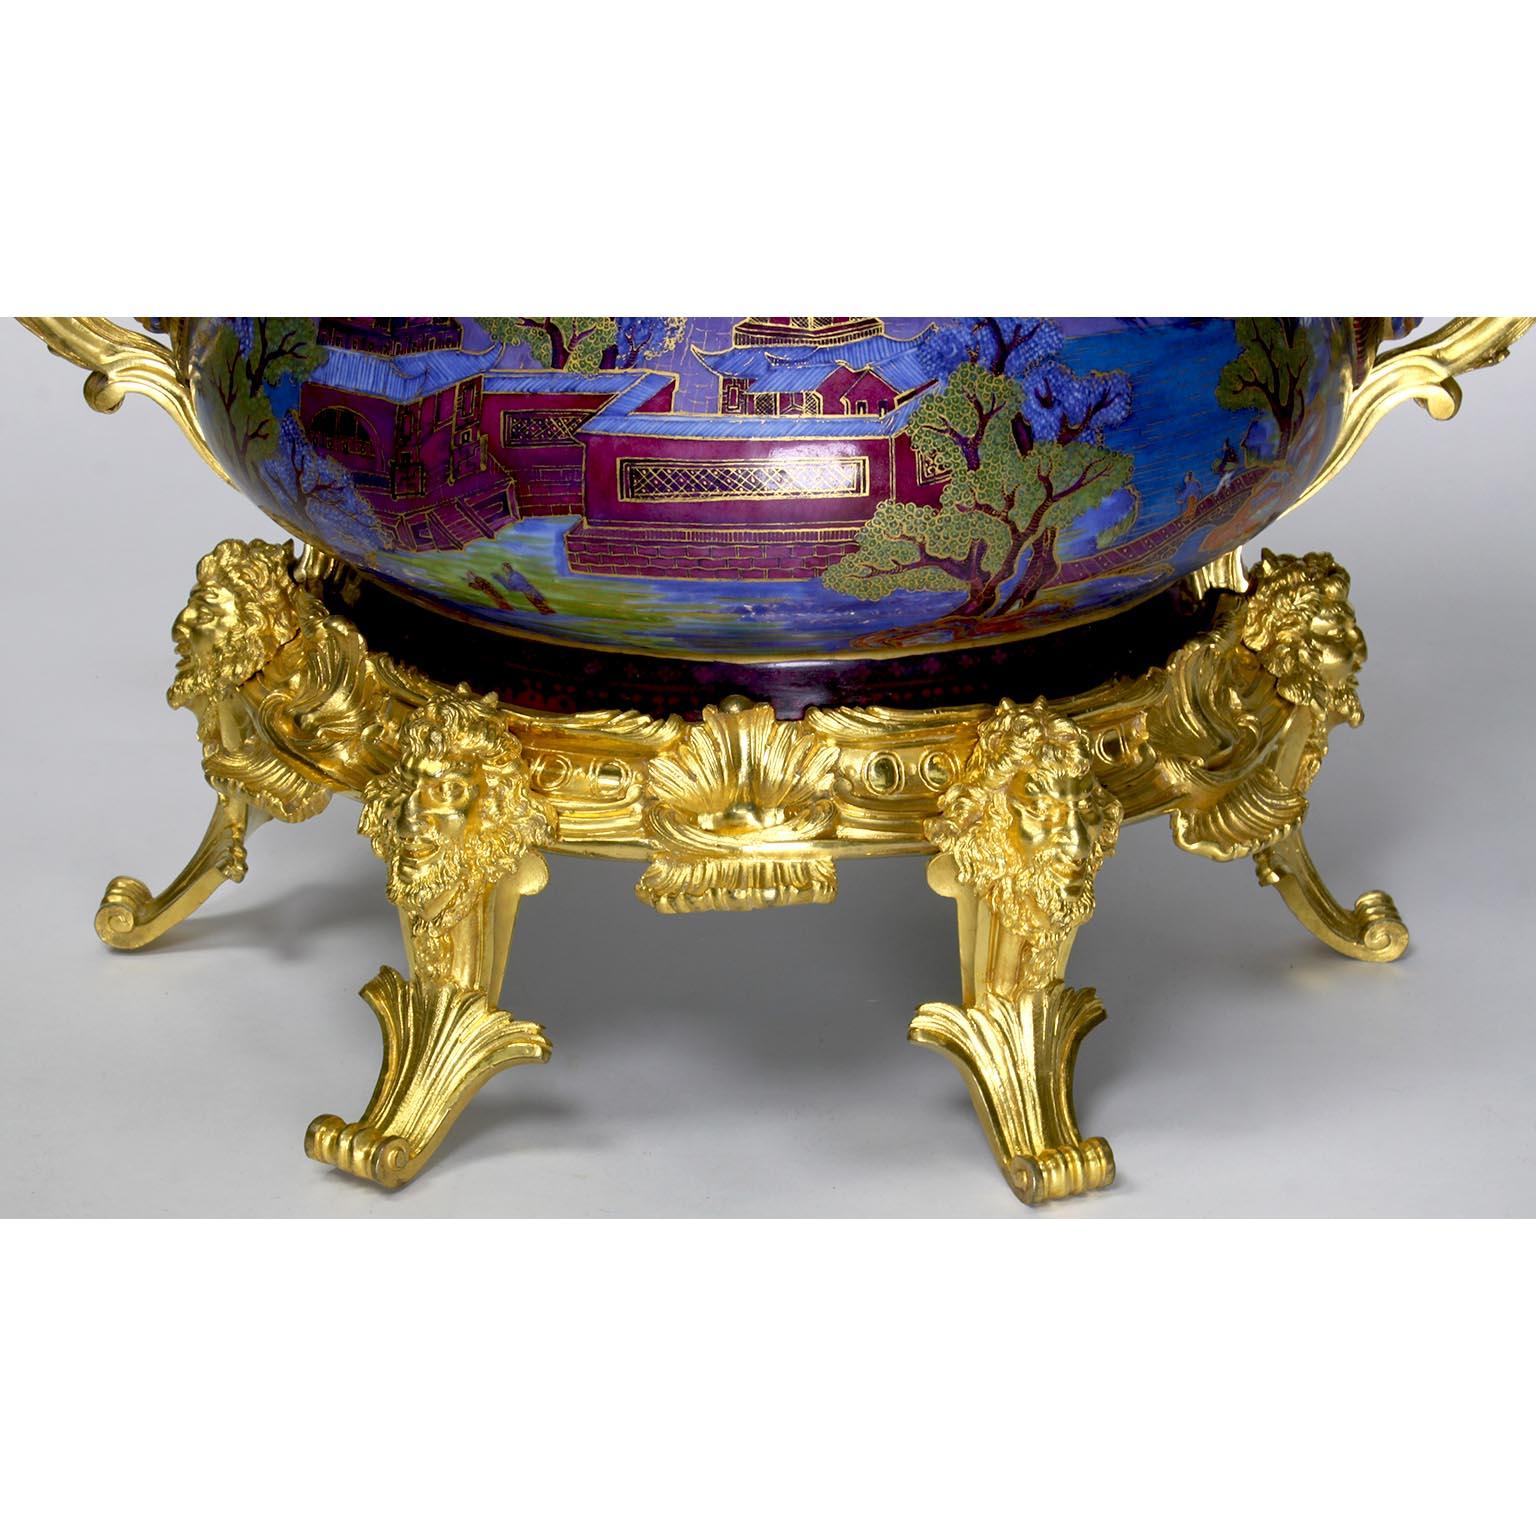 19th Century Chinese Export Famille Verte Porcelain & French Ormolu Chinoiserie Centerpiece For Sale